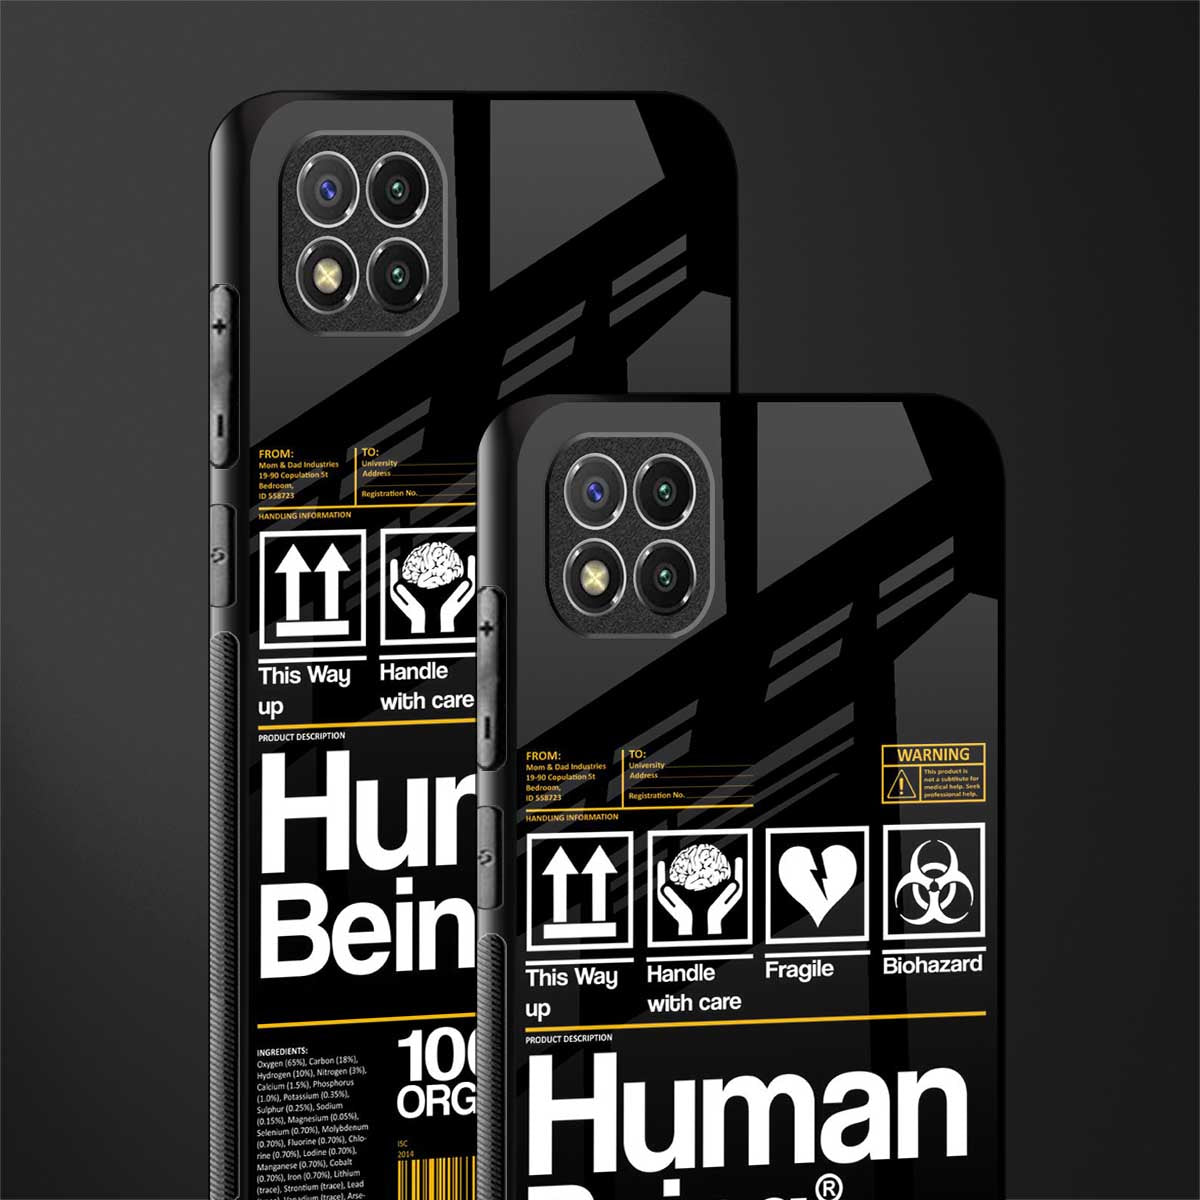 human being label phone cover for poco c3